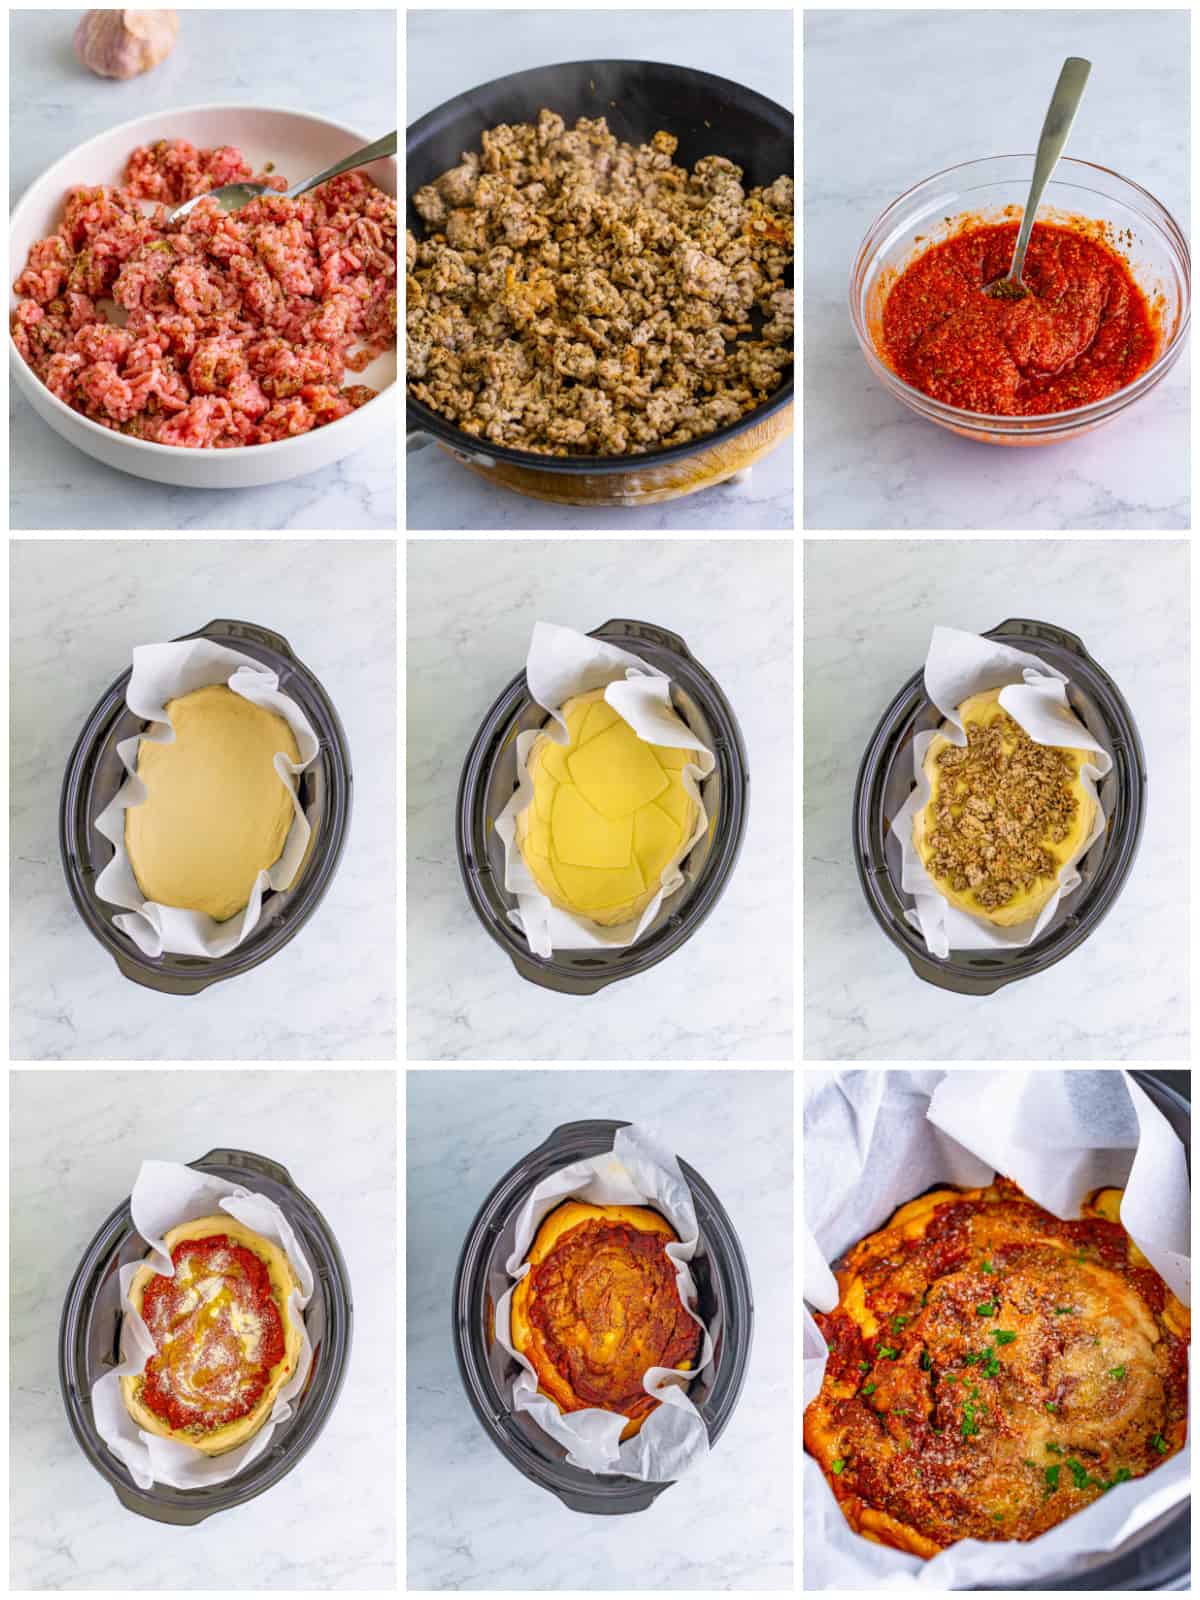 Step by step photos on how to make a Slow Cooker Pizza